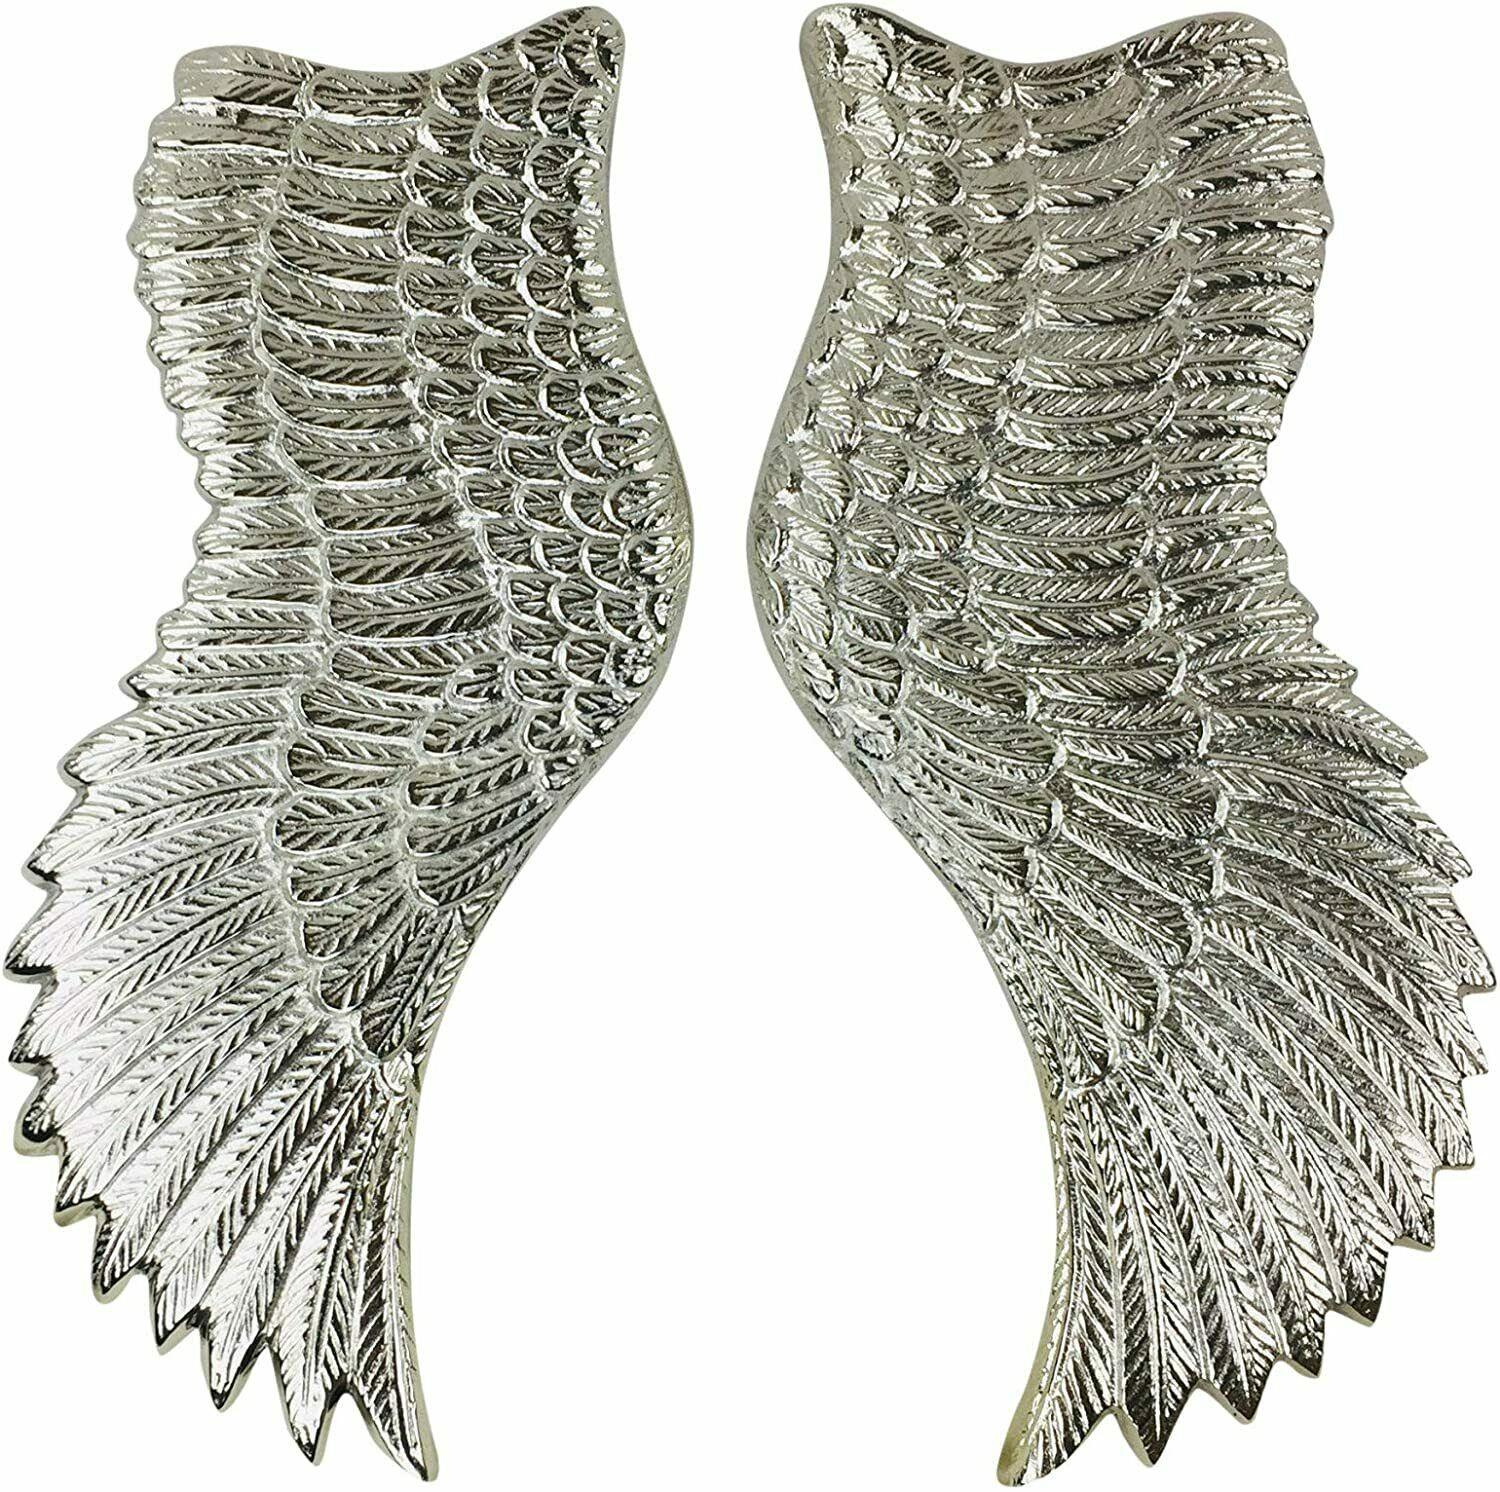 Angel Wings Wall Ornament - image 1 of 3